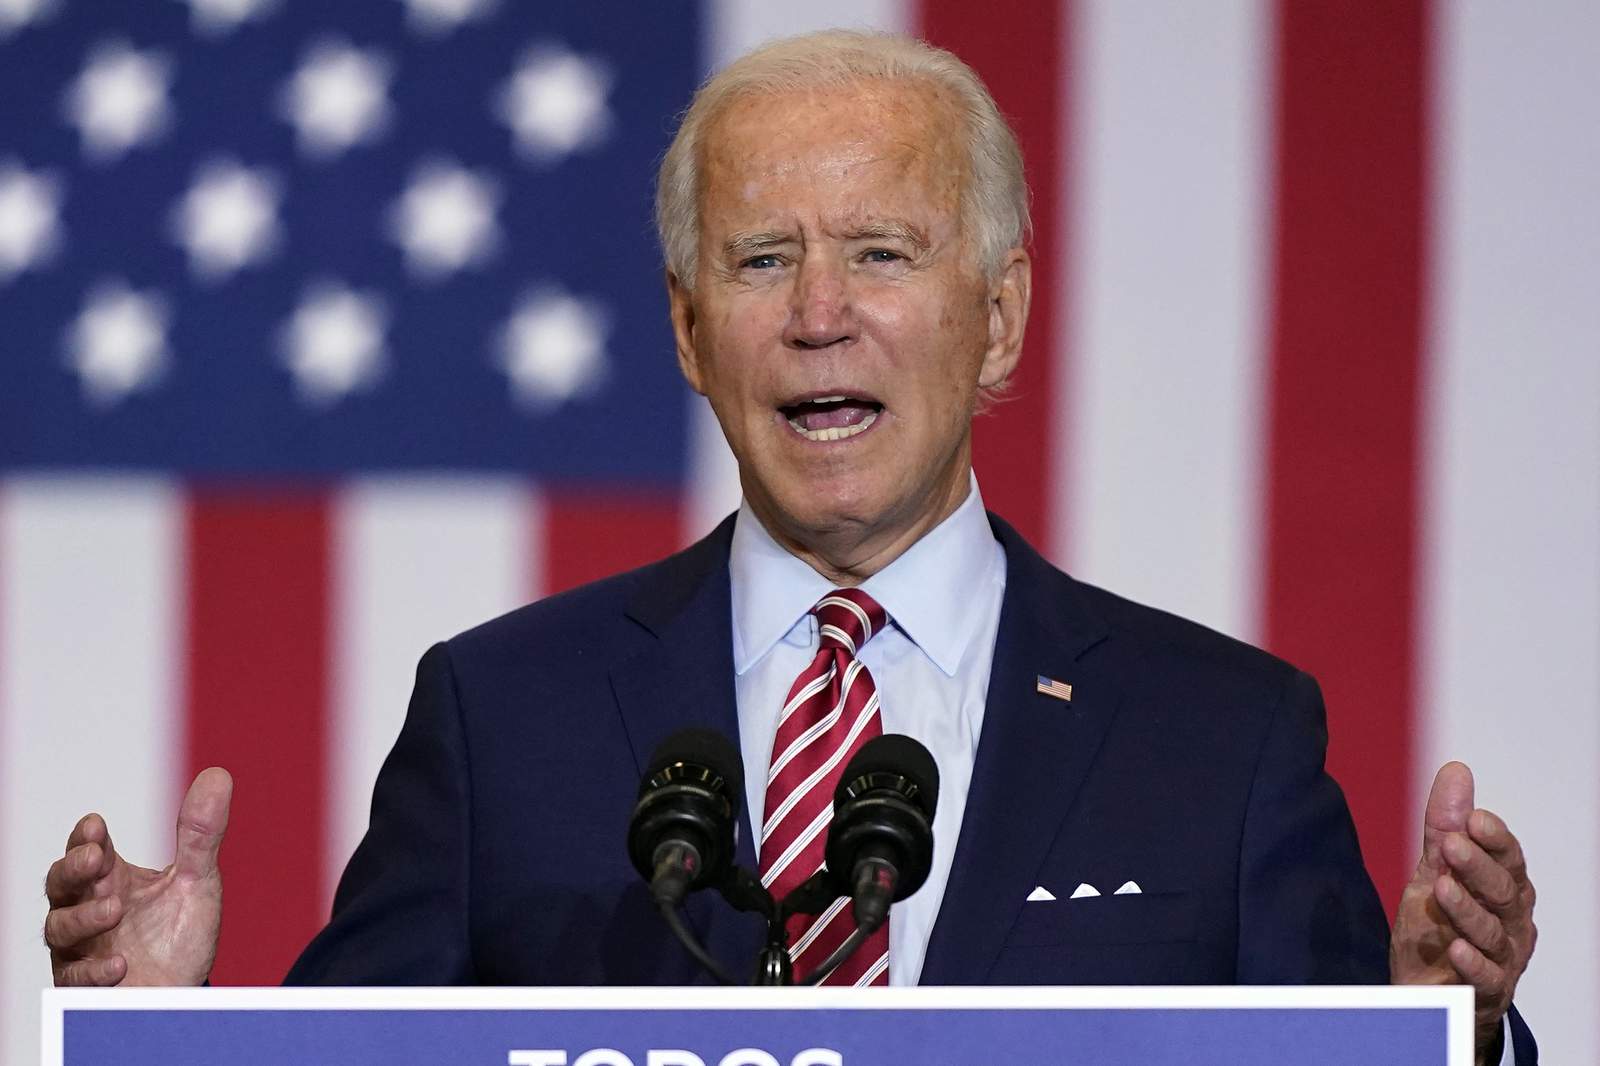 Biden would push for less US reliance on nukes for defense